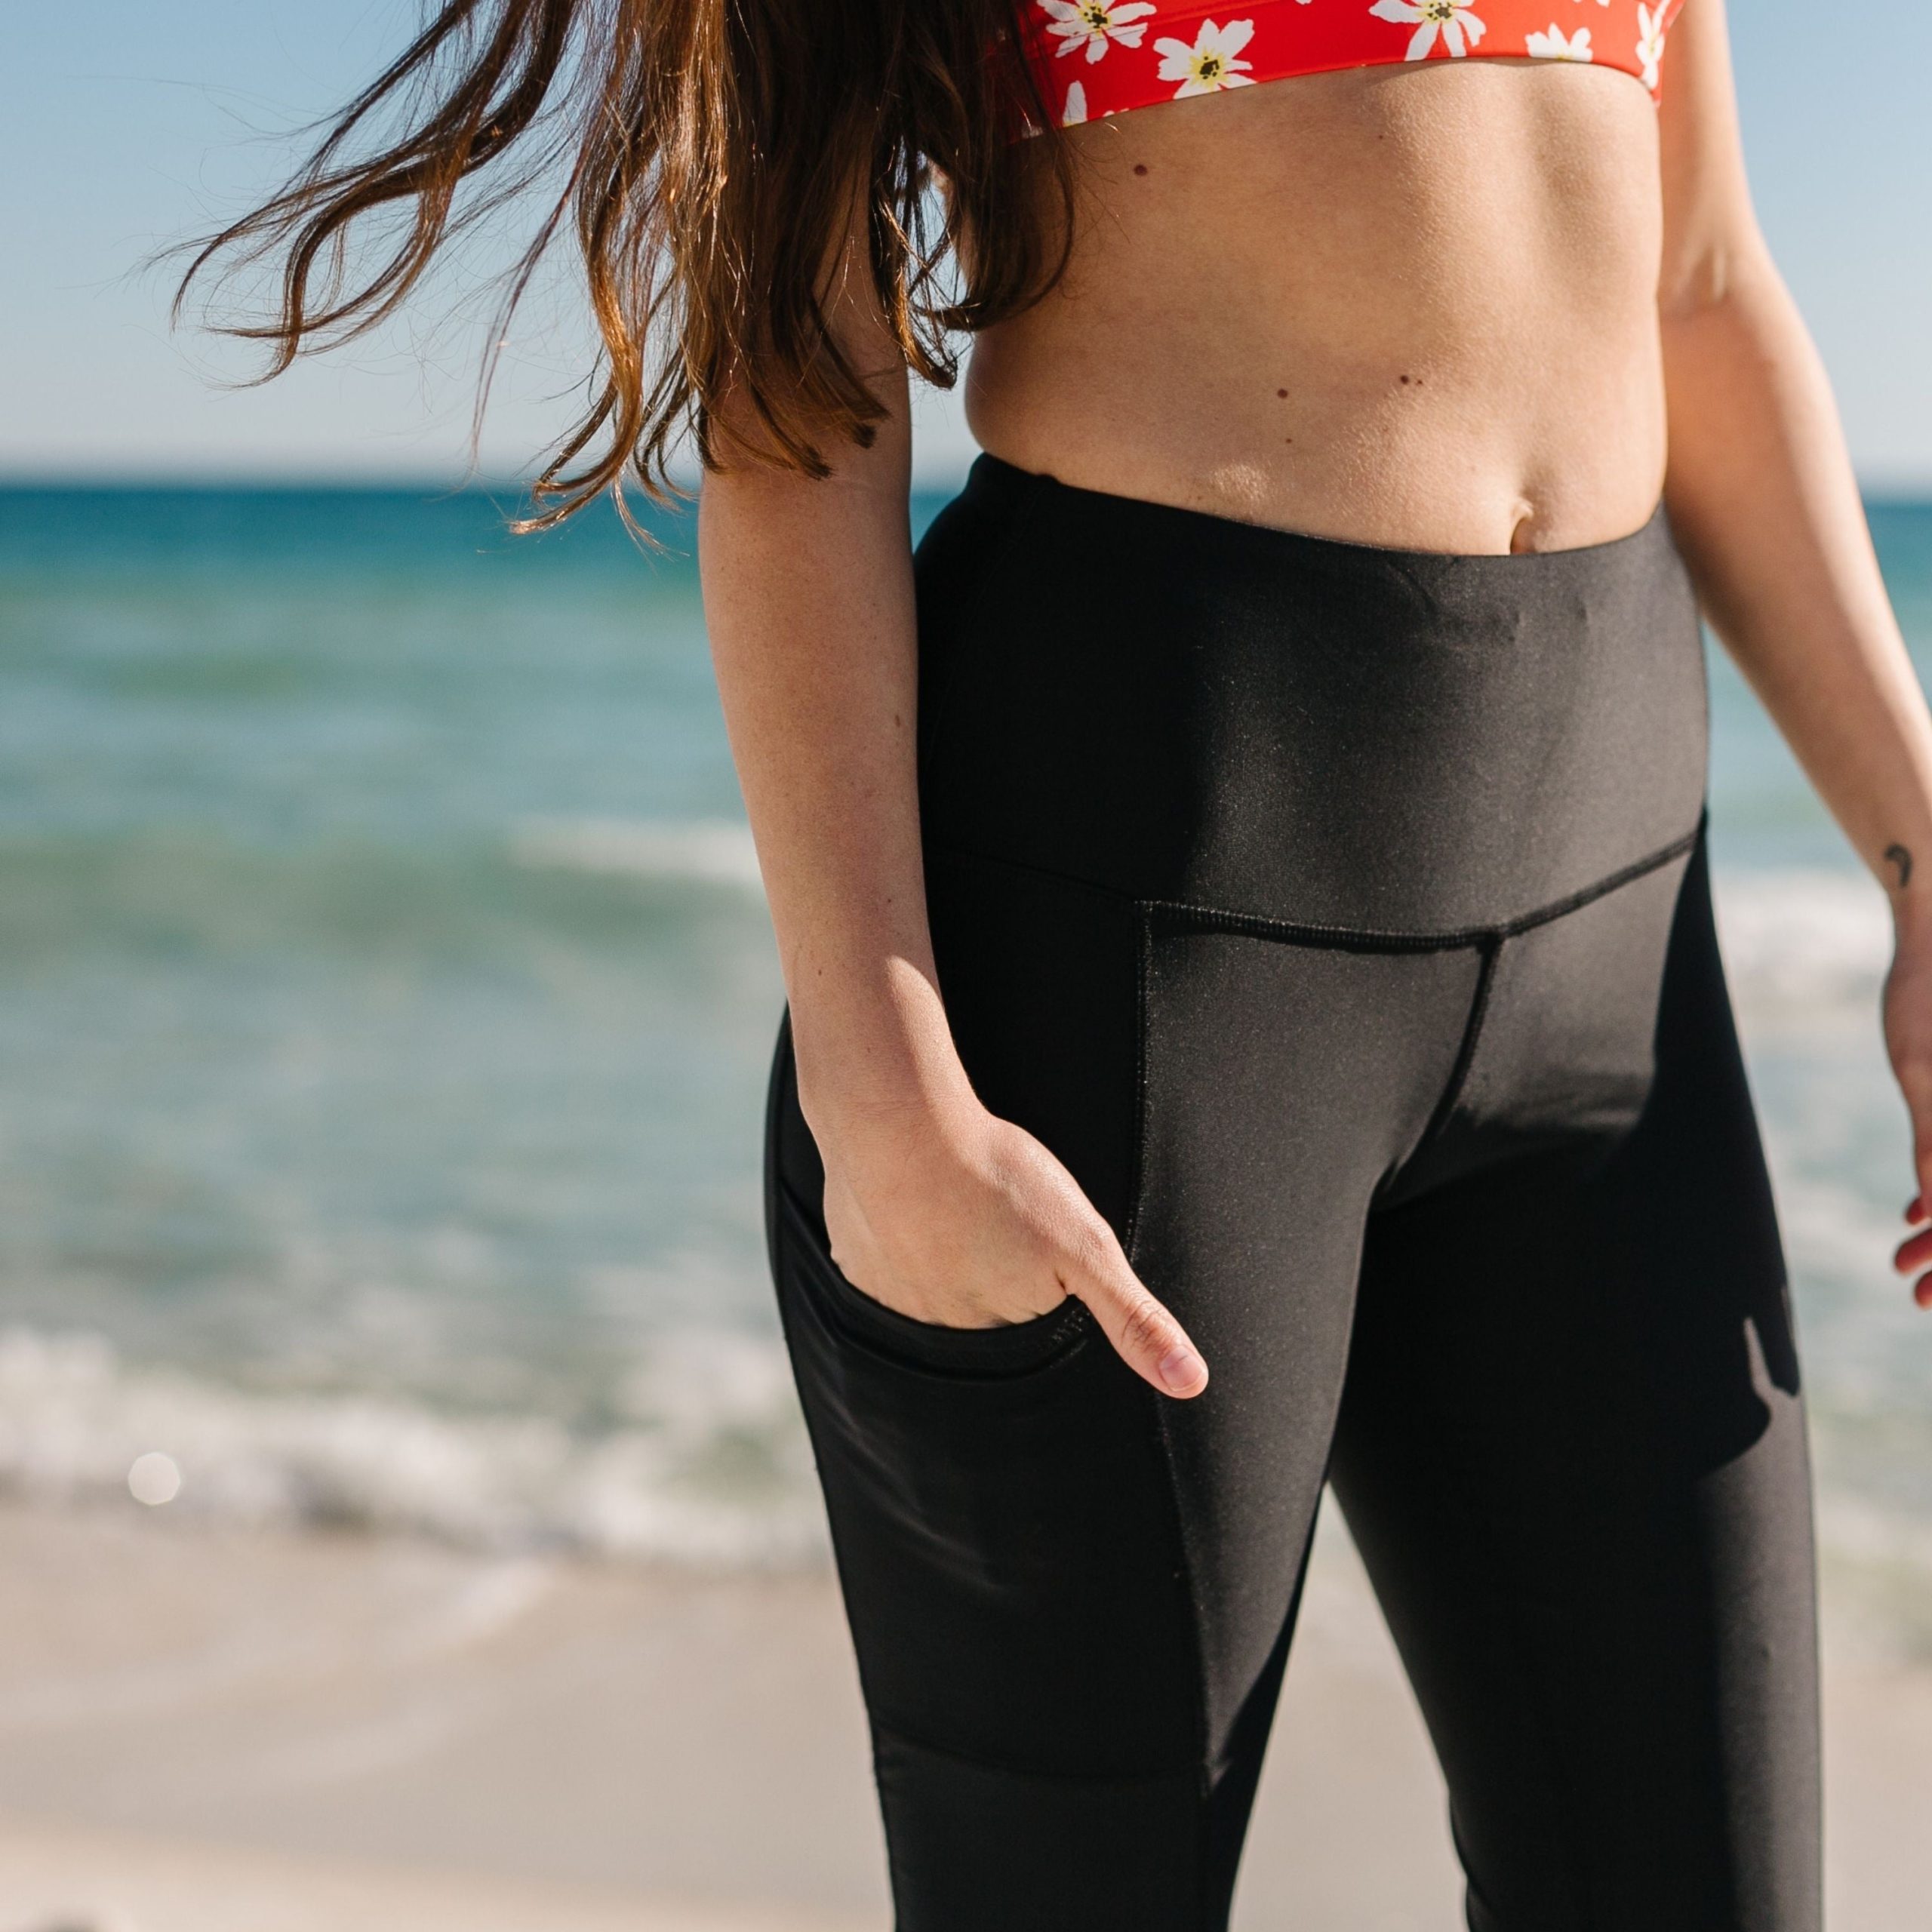 Swimming pants for women